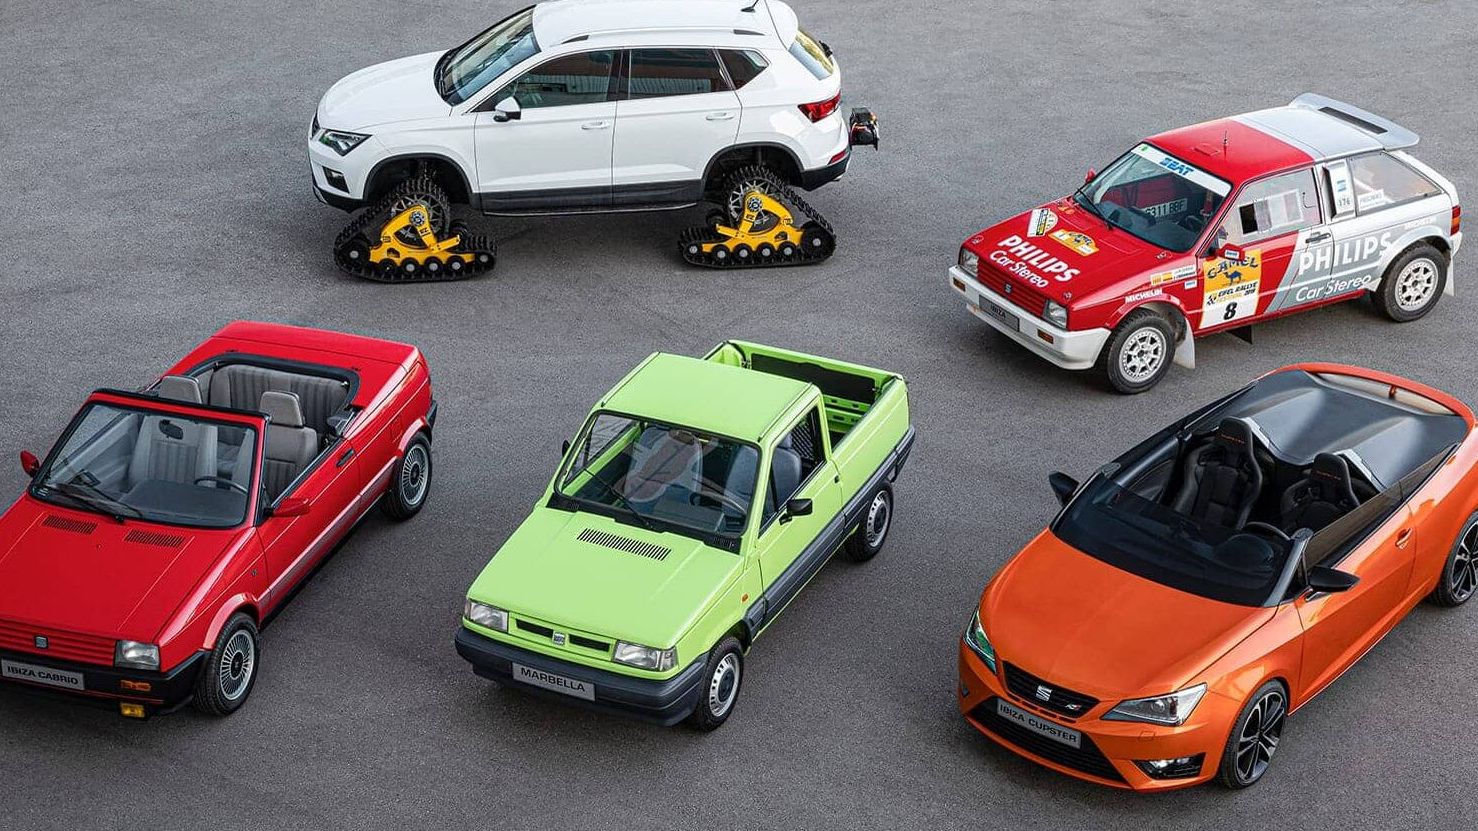 SEAT : 70 years and 16 special cars.